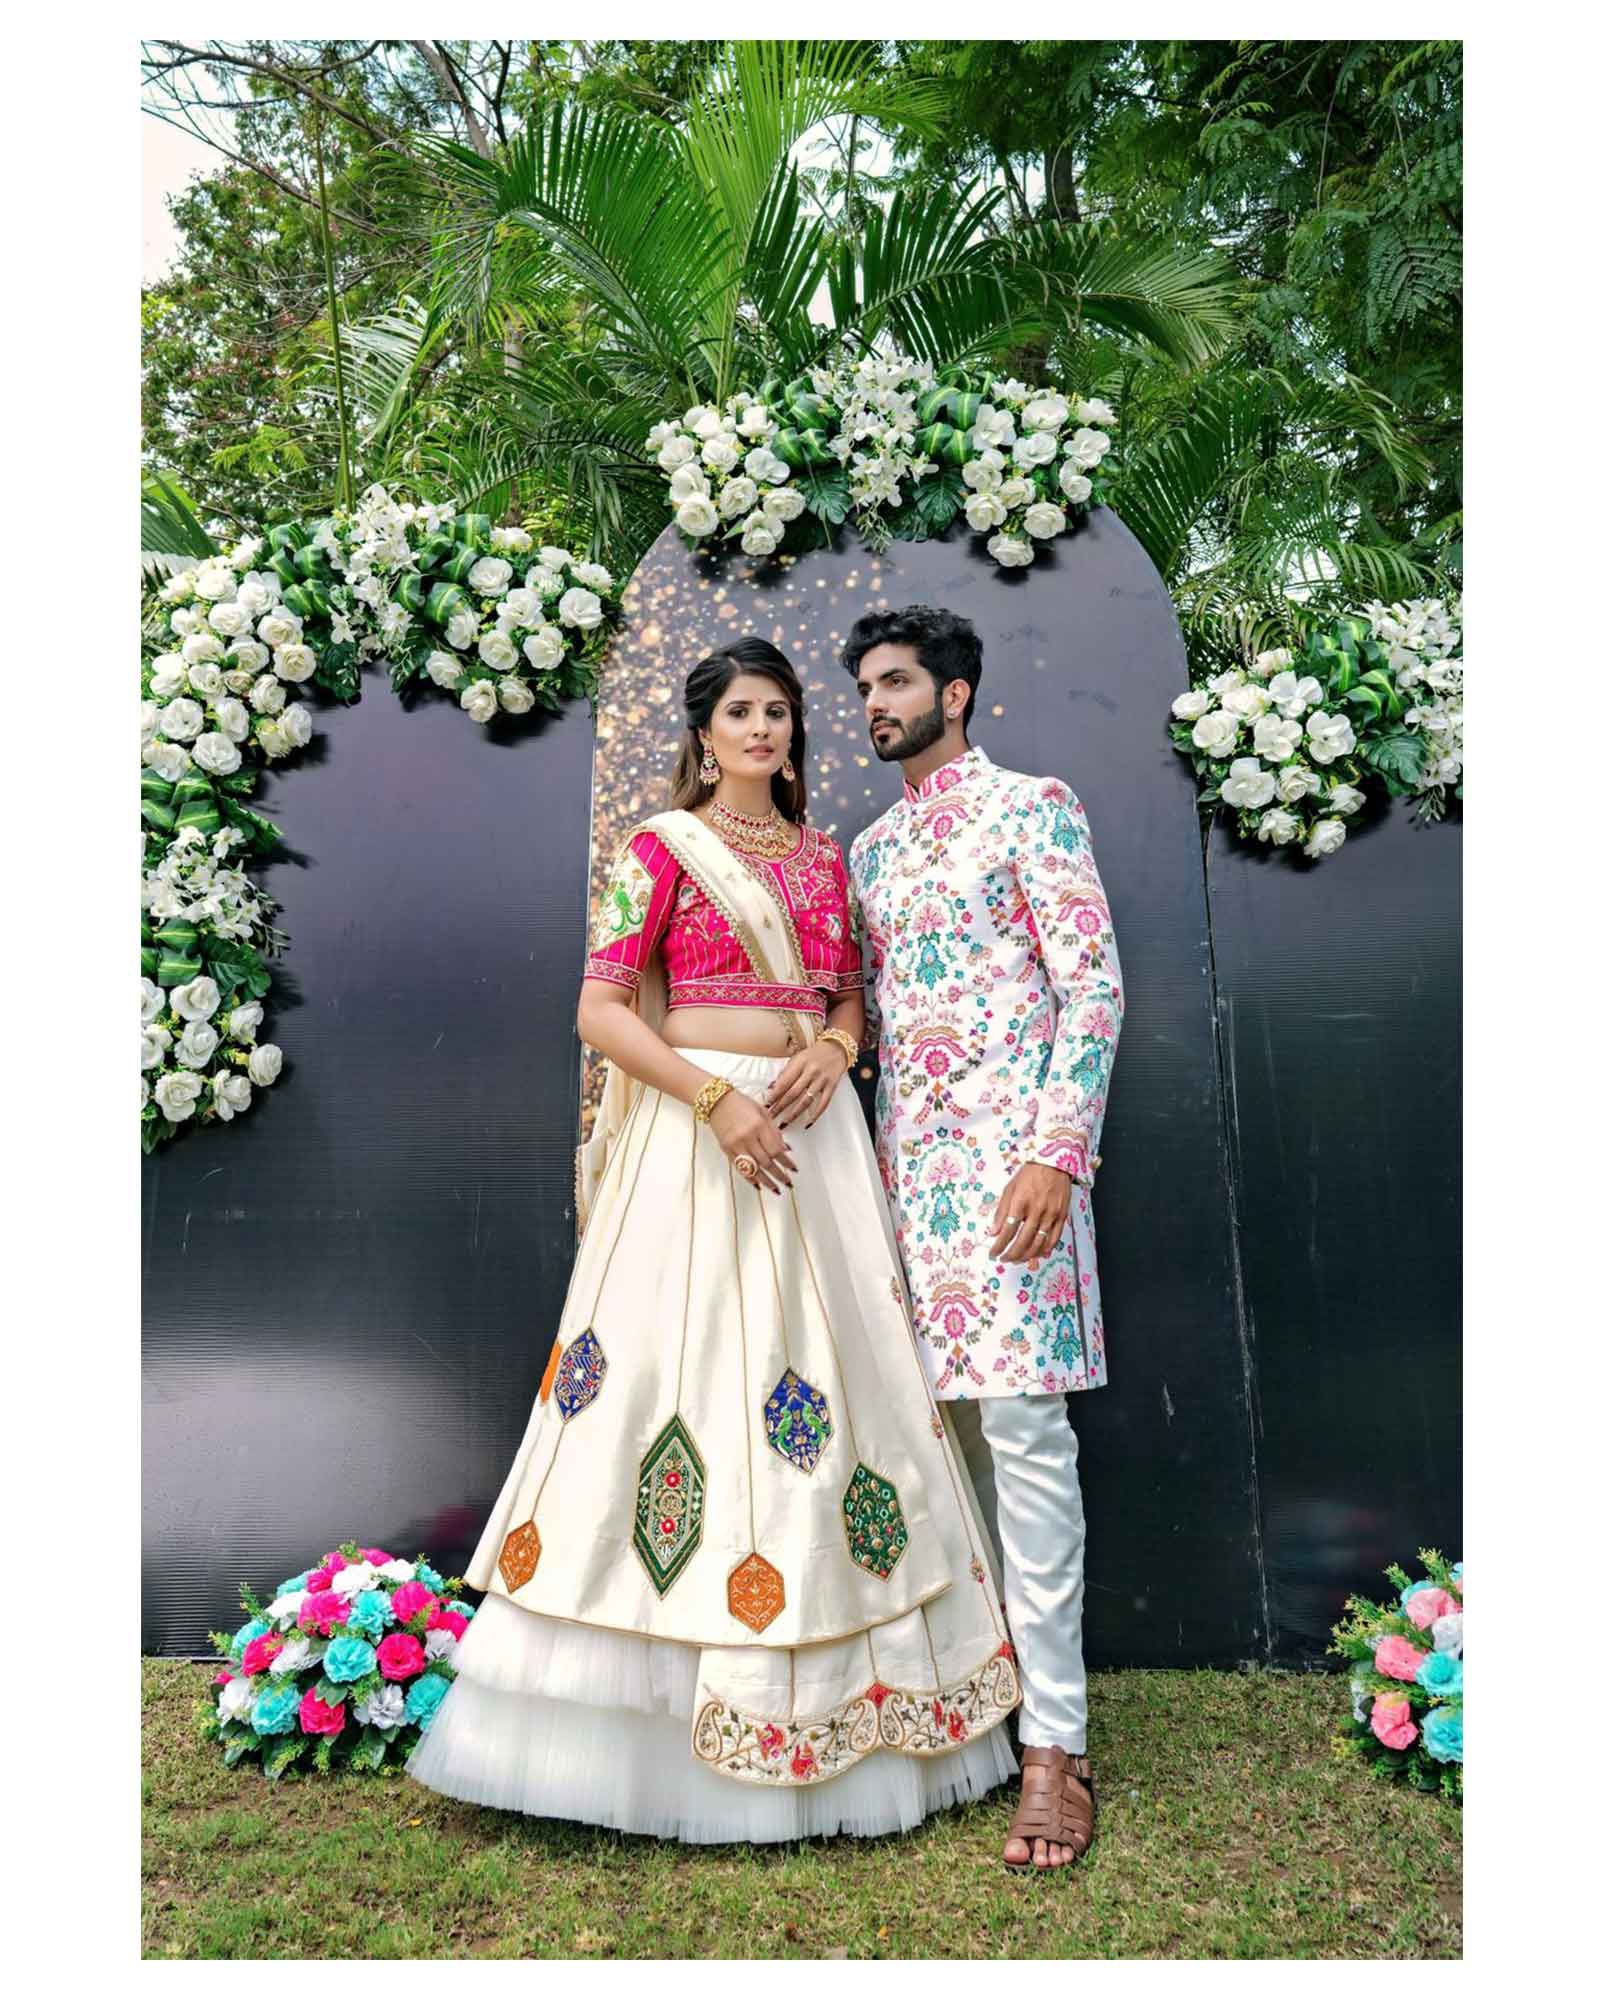 Pretty in Pink! This Couple Color Coordinated Their Wedding Dresses  Perfectly! – India's Wedding Blog